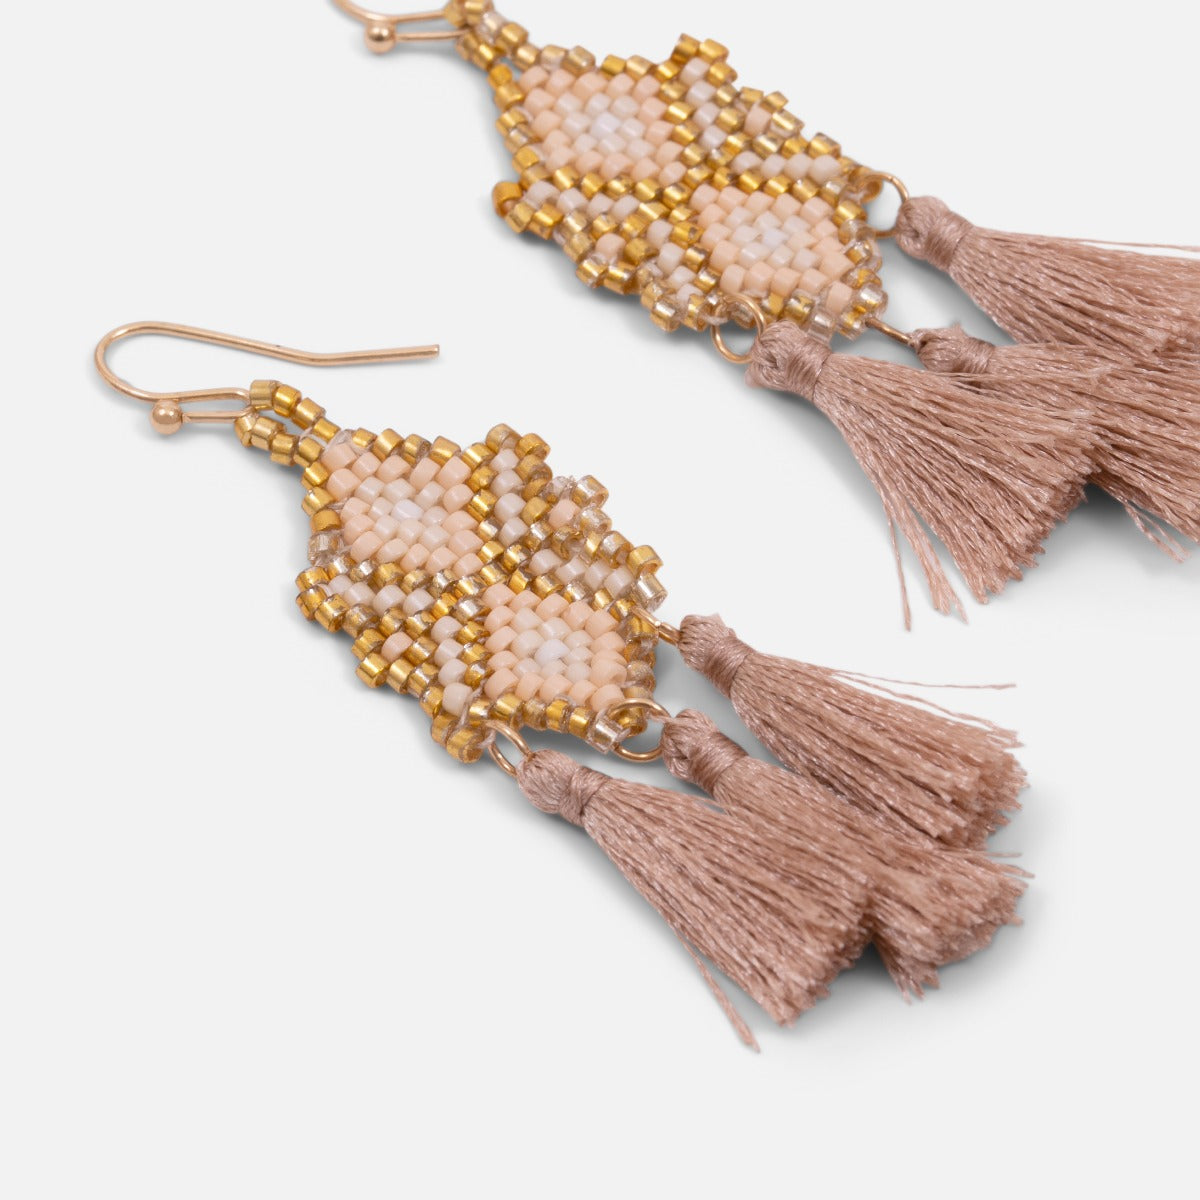 Pendant earrings with beads and tassels